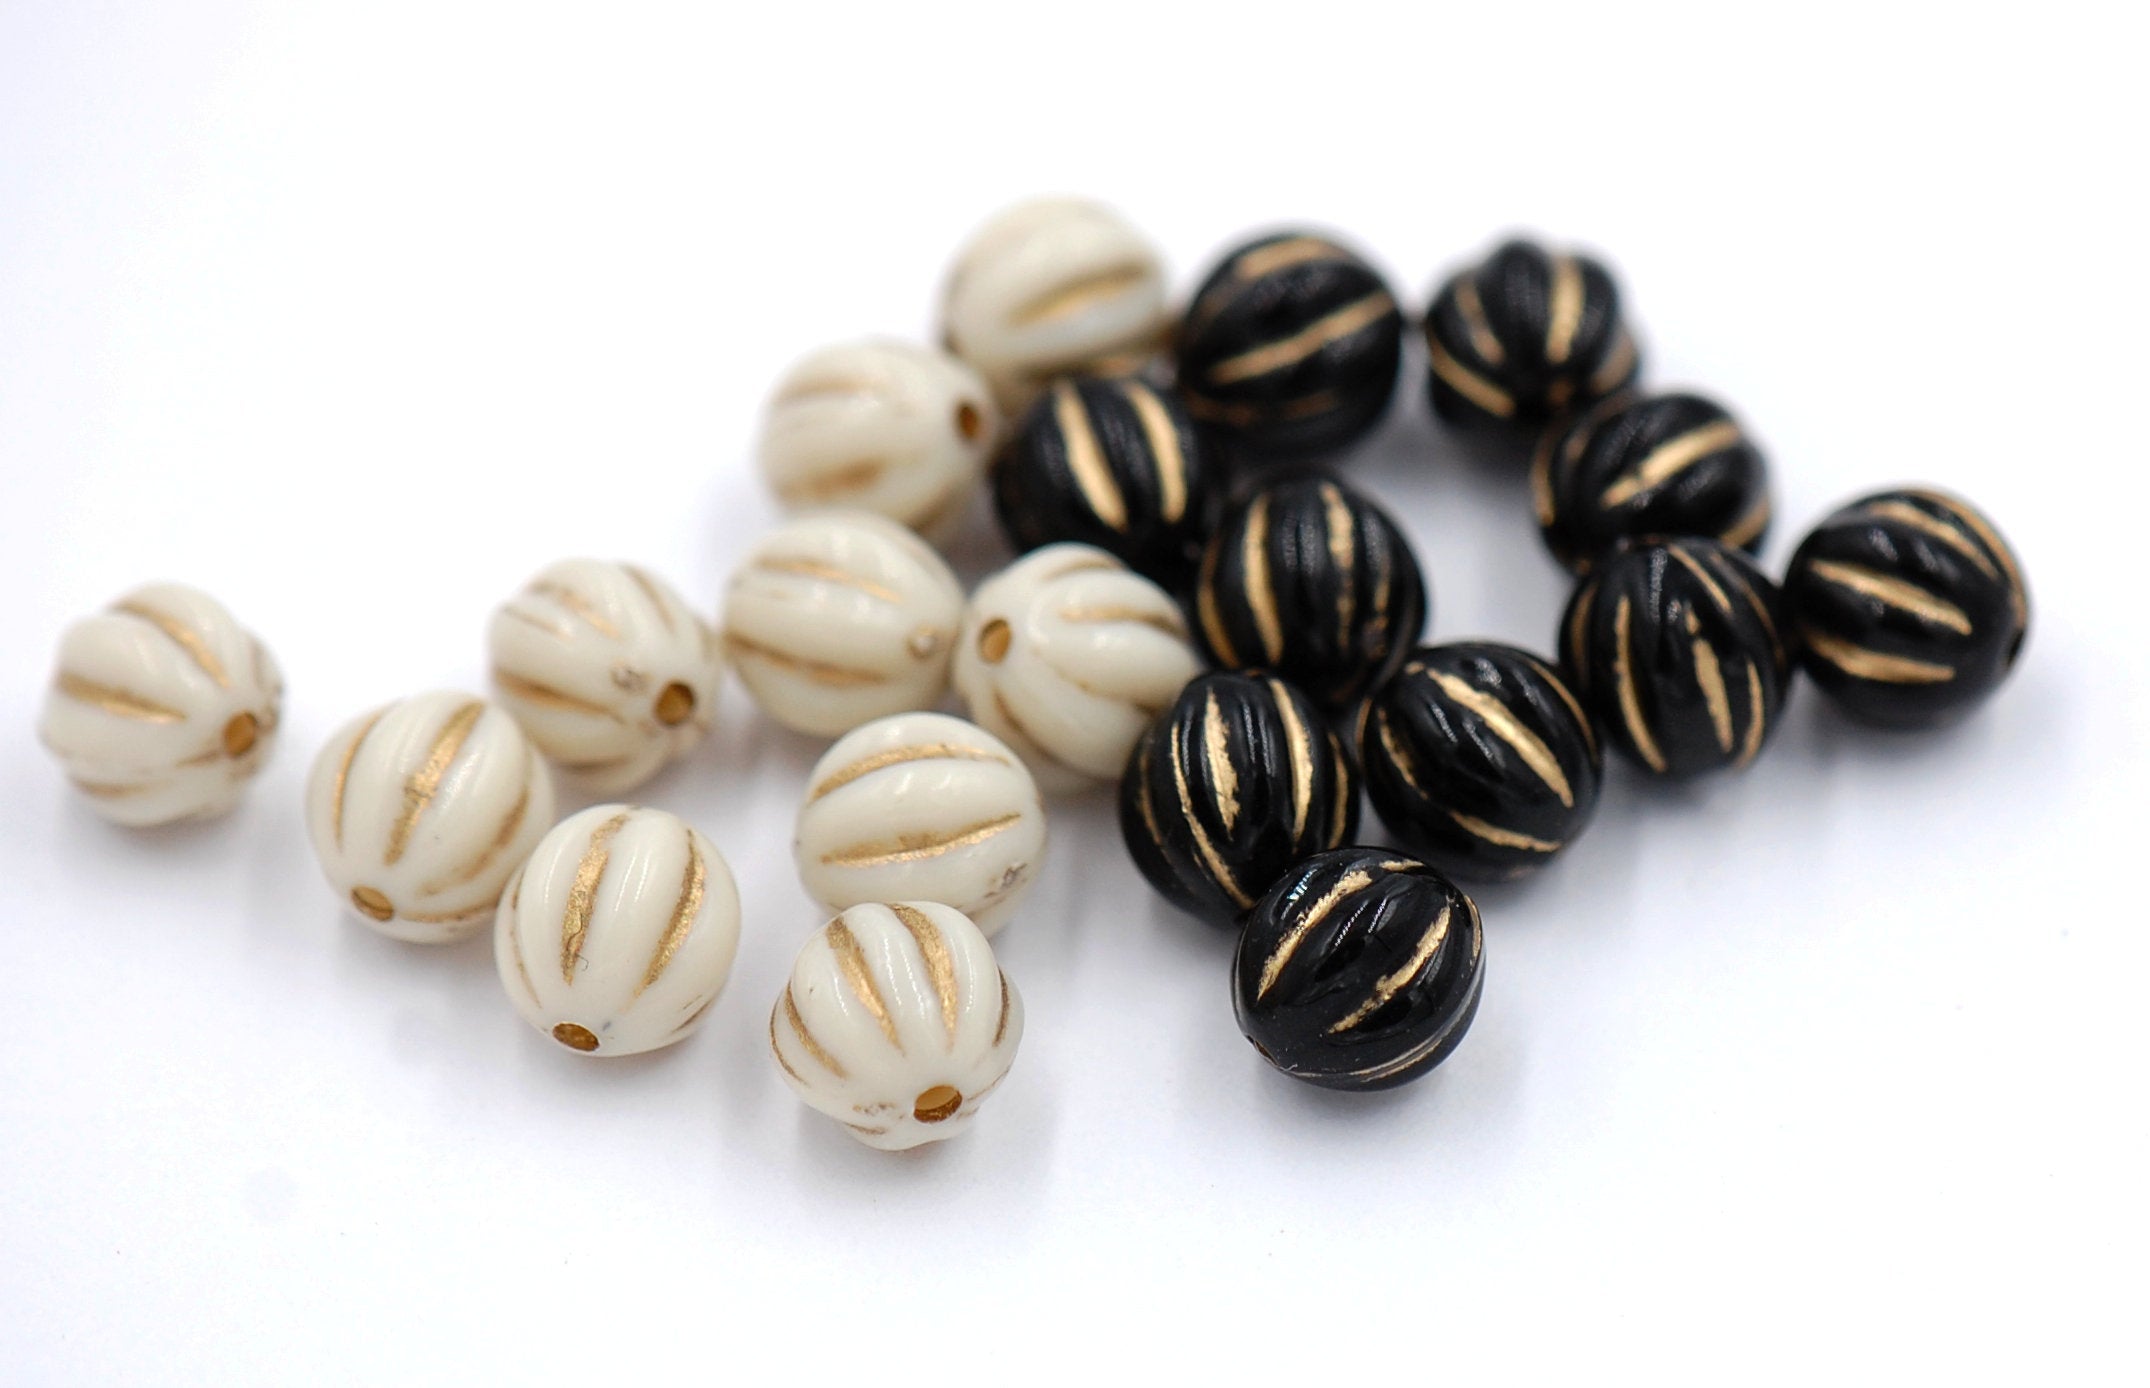 Antiqued Black or Beige Acrylic Fluted Carved beads Gold Enlaced 8mm -100pc